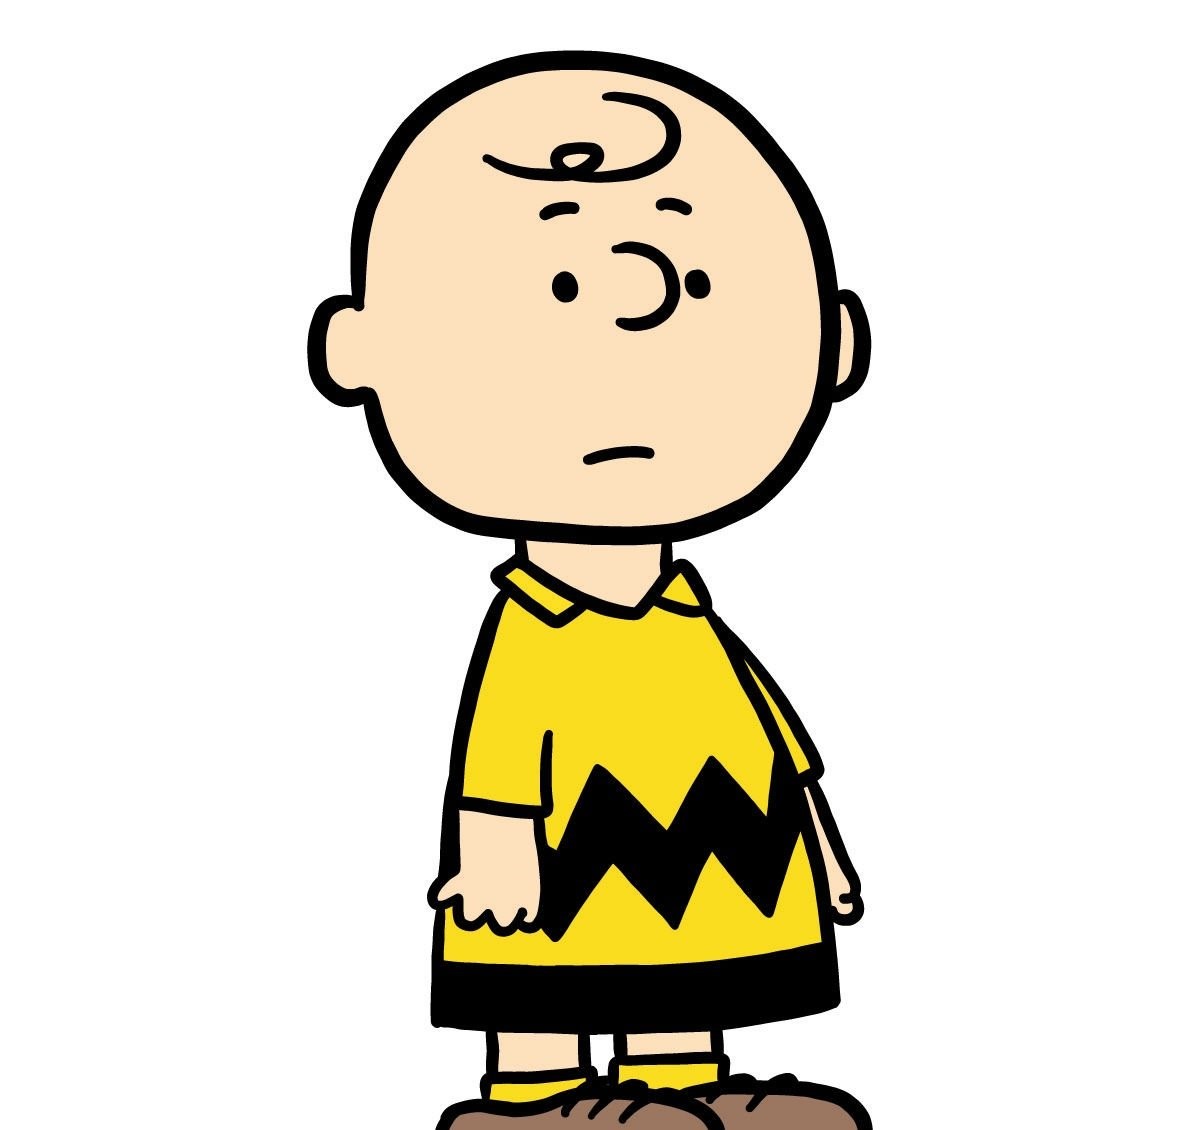 5 cents charlie brown